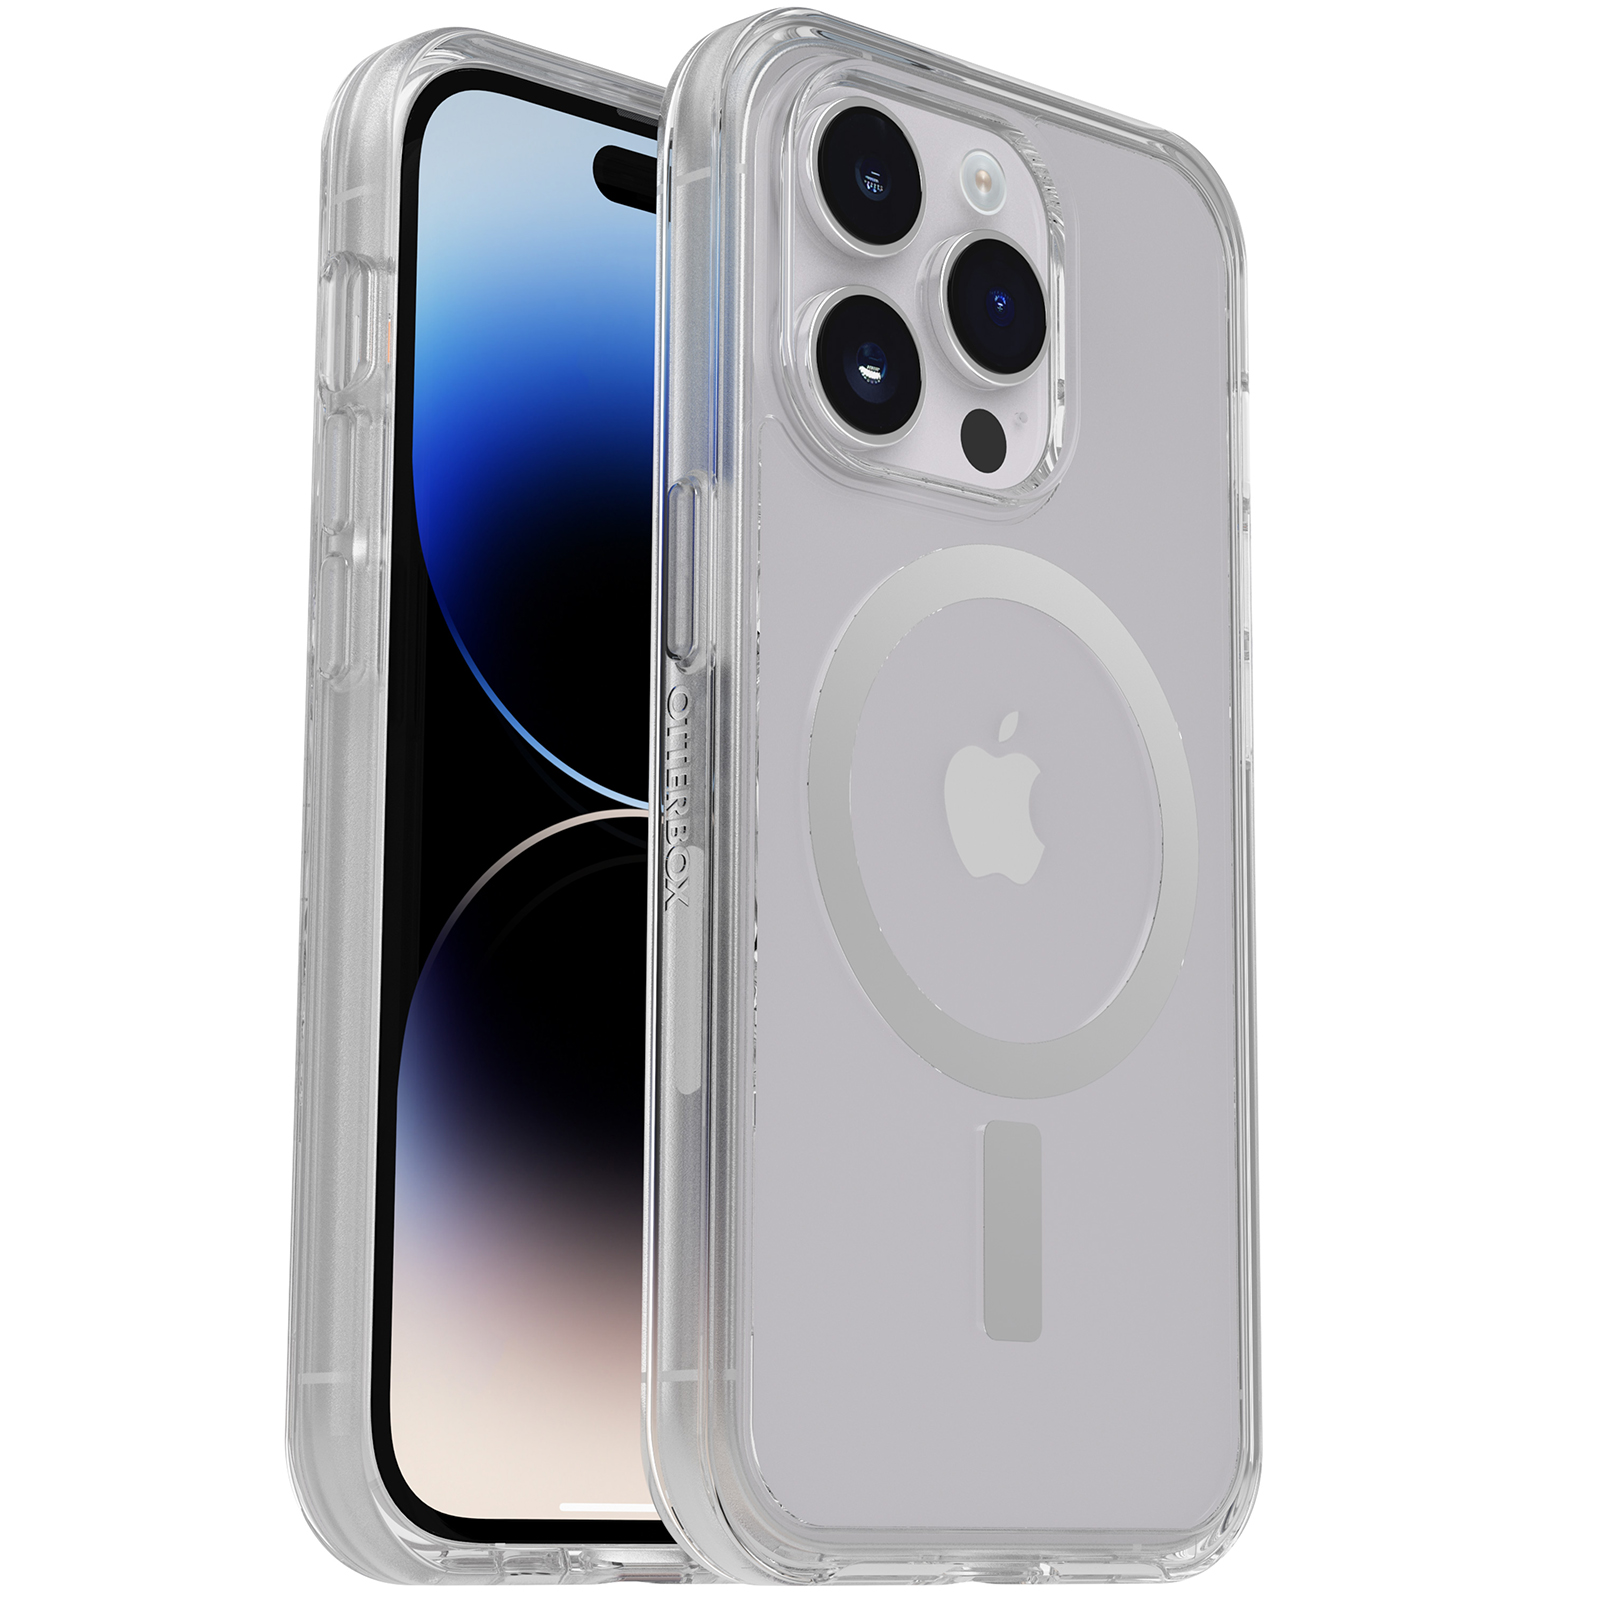 For Apple iPhone X-15 Pro Max Retail Box Empty Packaging Case